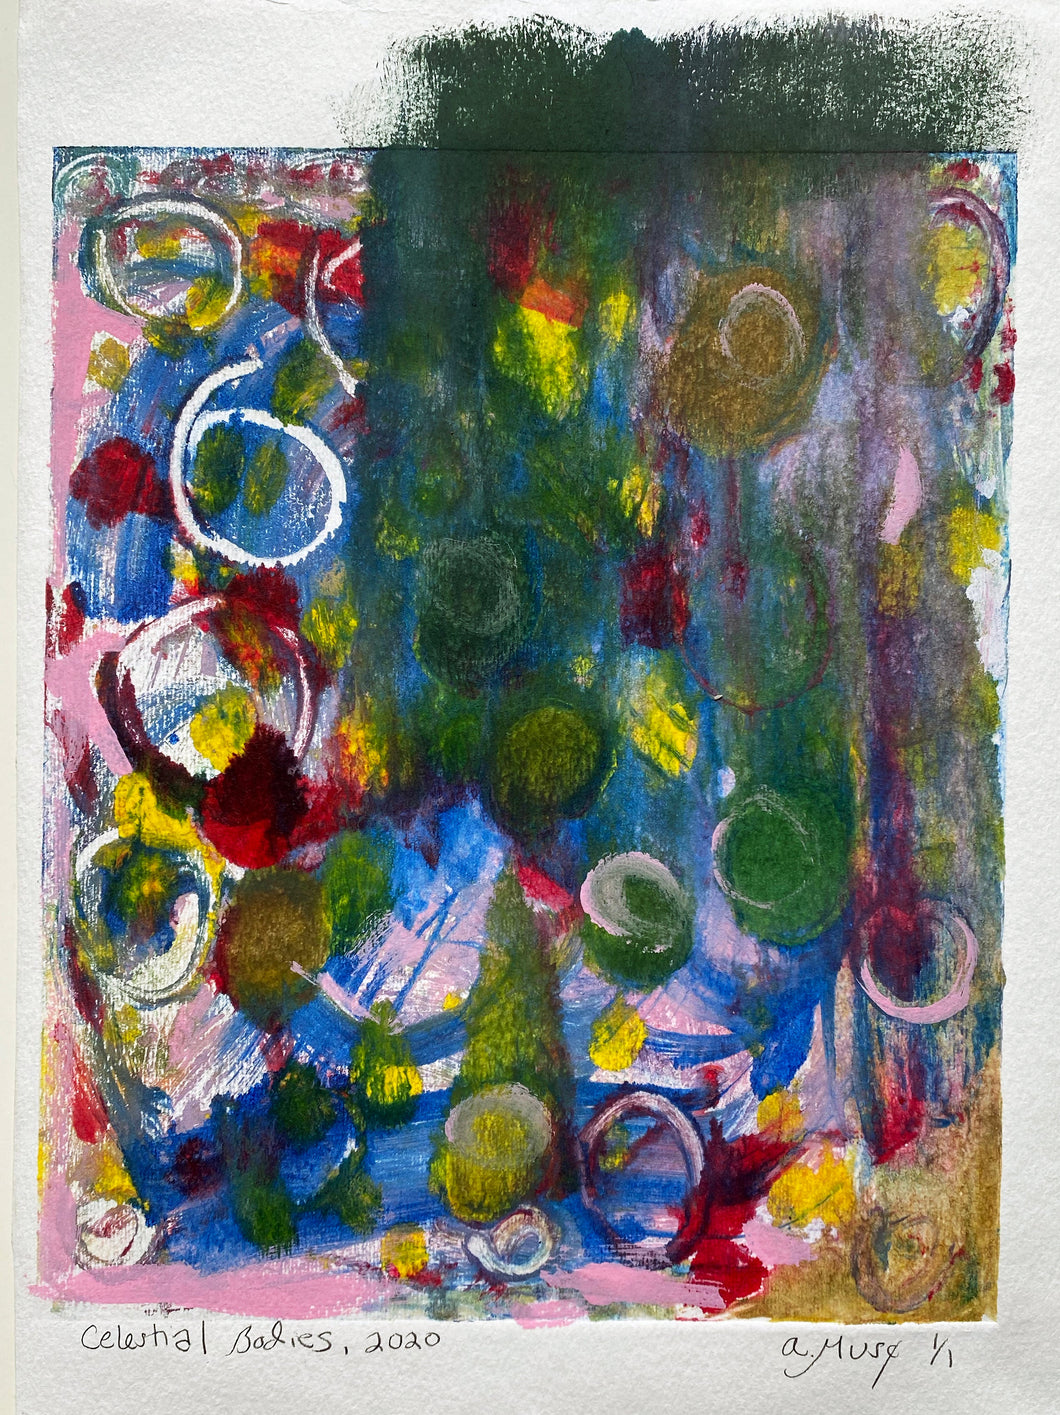 Celestial Bodies by a.muse, Color Monotype Art on Paper